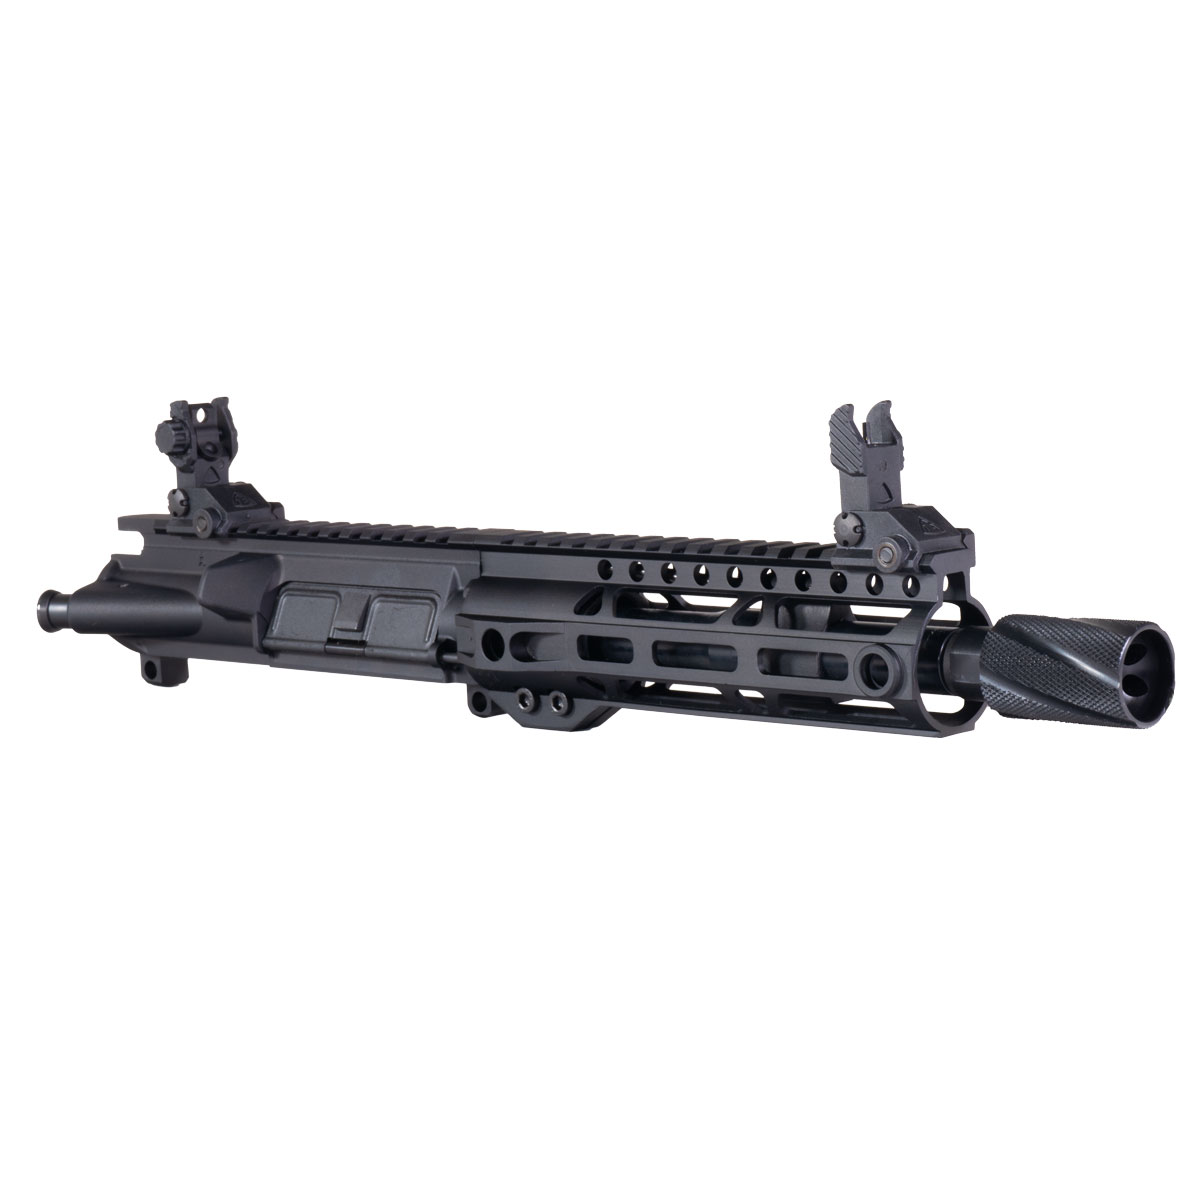 DD 'The Changeup' 7.5-inch AR-15 5.56 NATO Nitride  Rifle Upper Build Kit